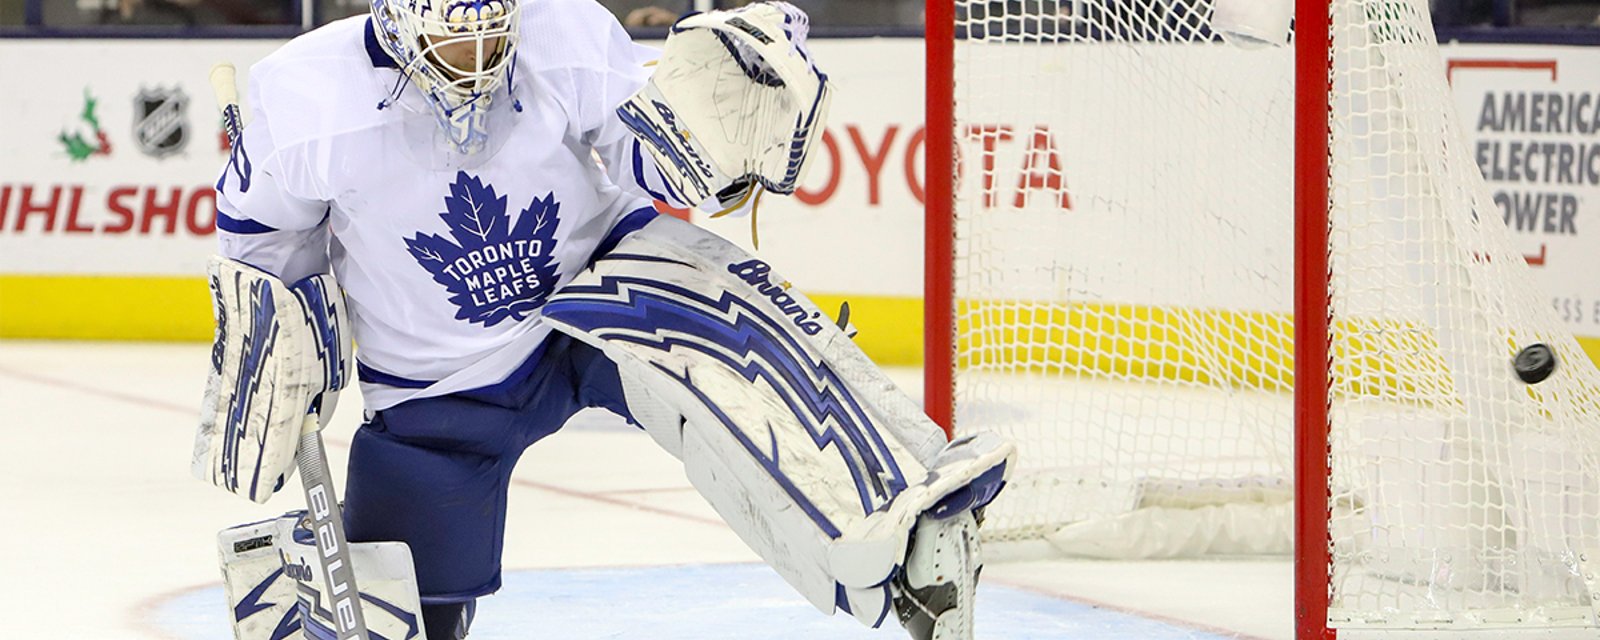 Report: Leafs and goalie Sparks nearing contract extension 